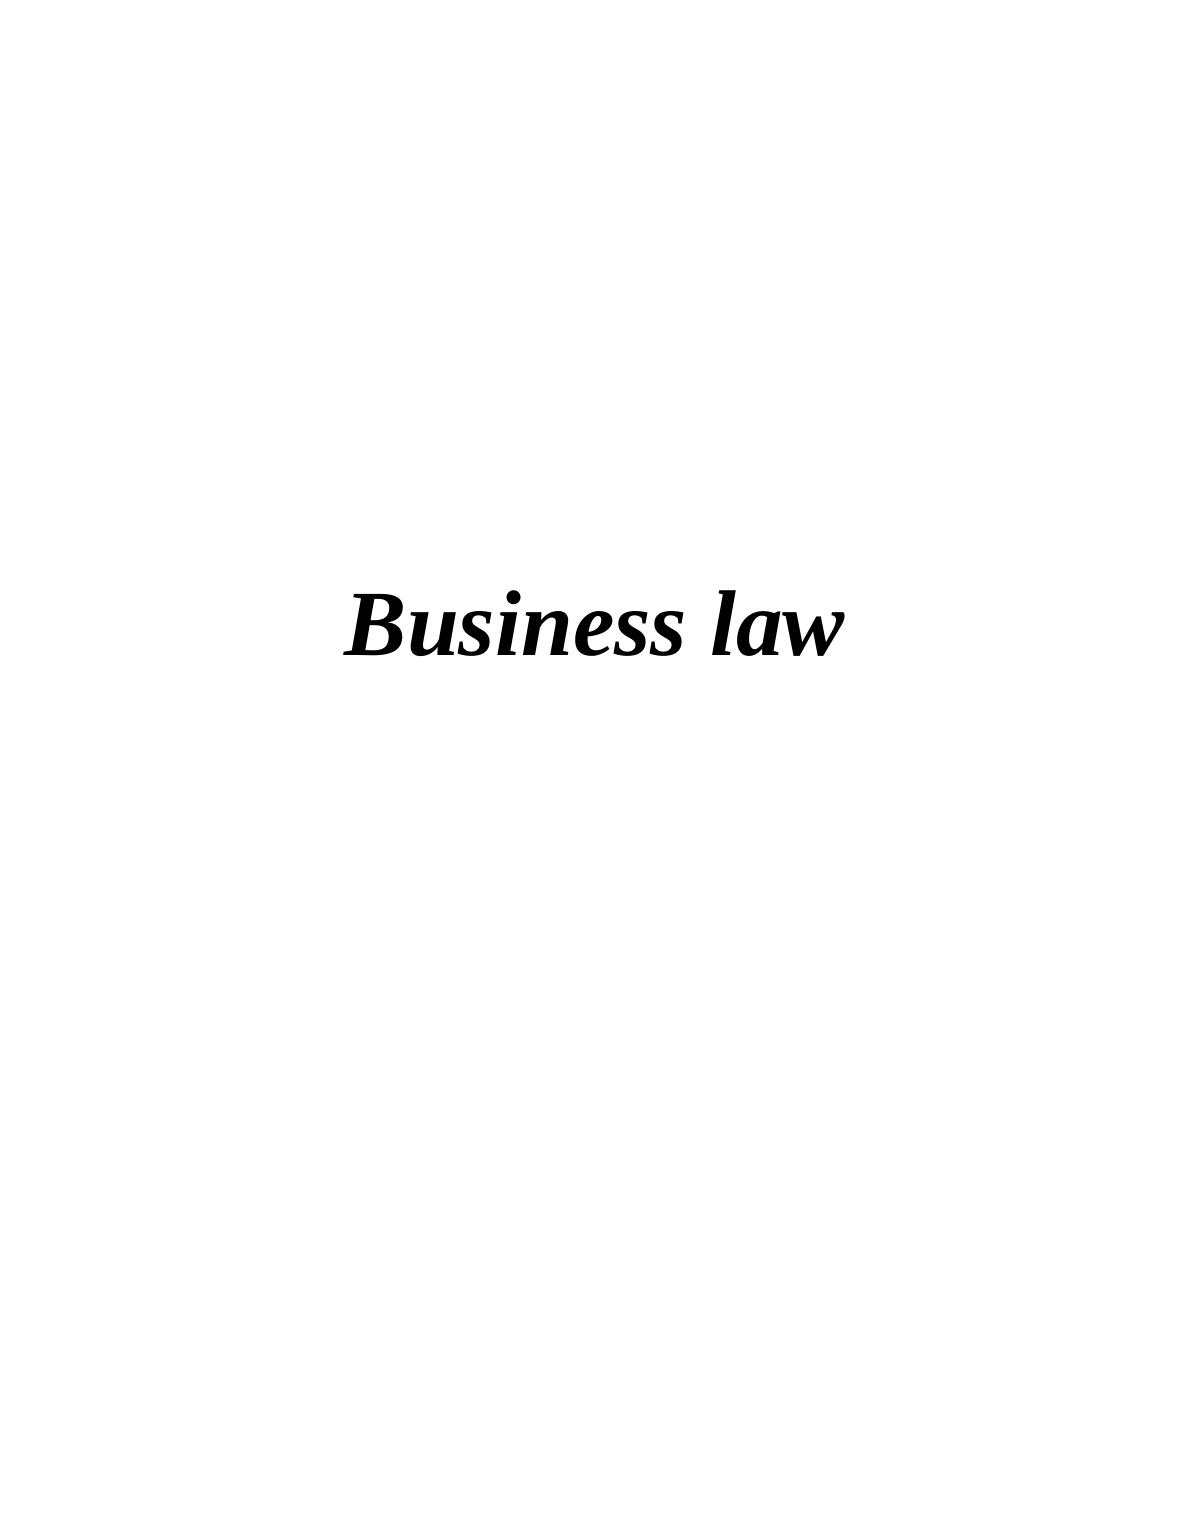 Business Law: Types of Business Organizations and Director's Responsibilities_1